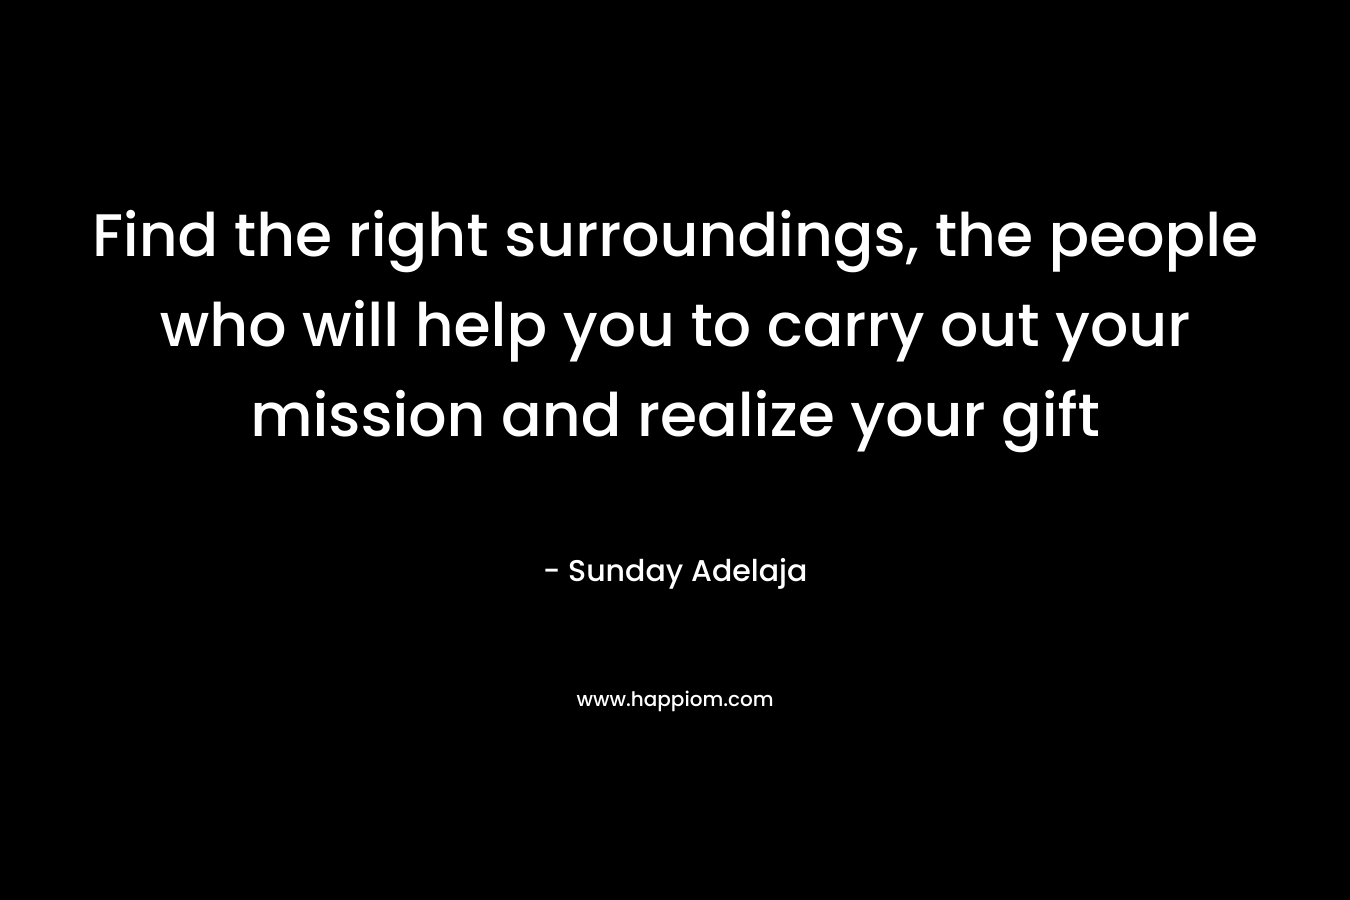 Find the right surroundings, the people who will help you to carry out your mission and realize your gift